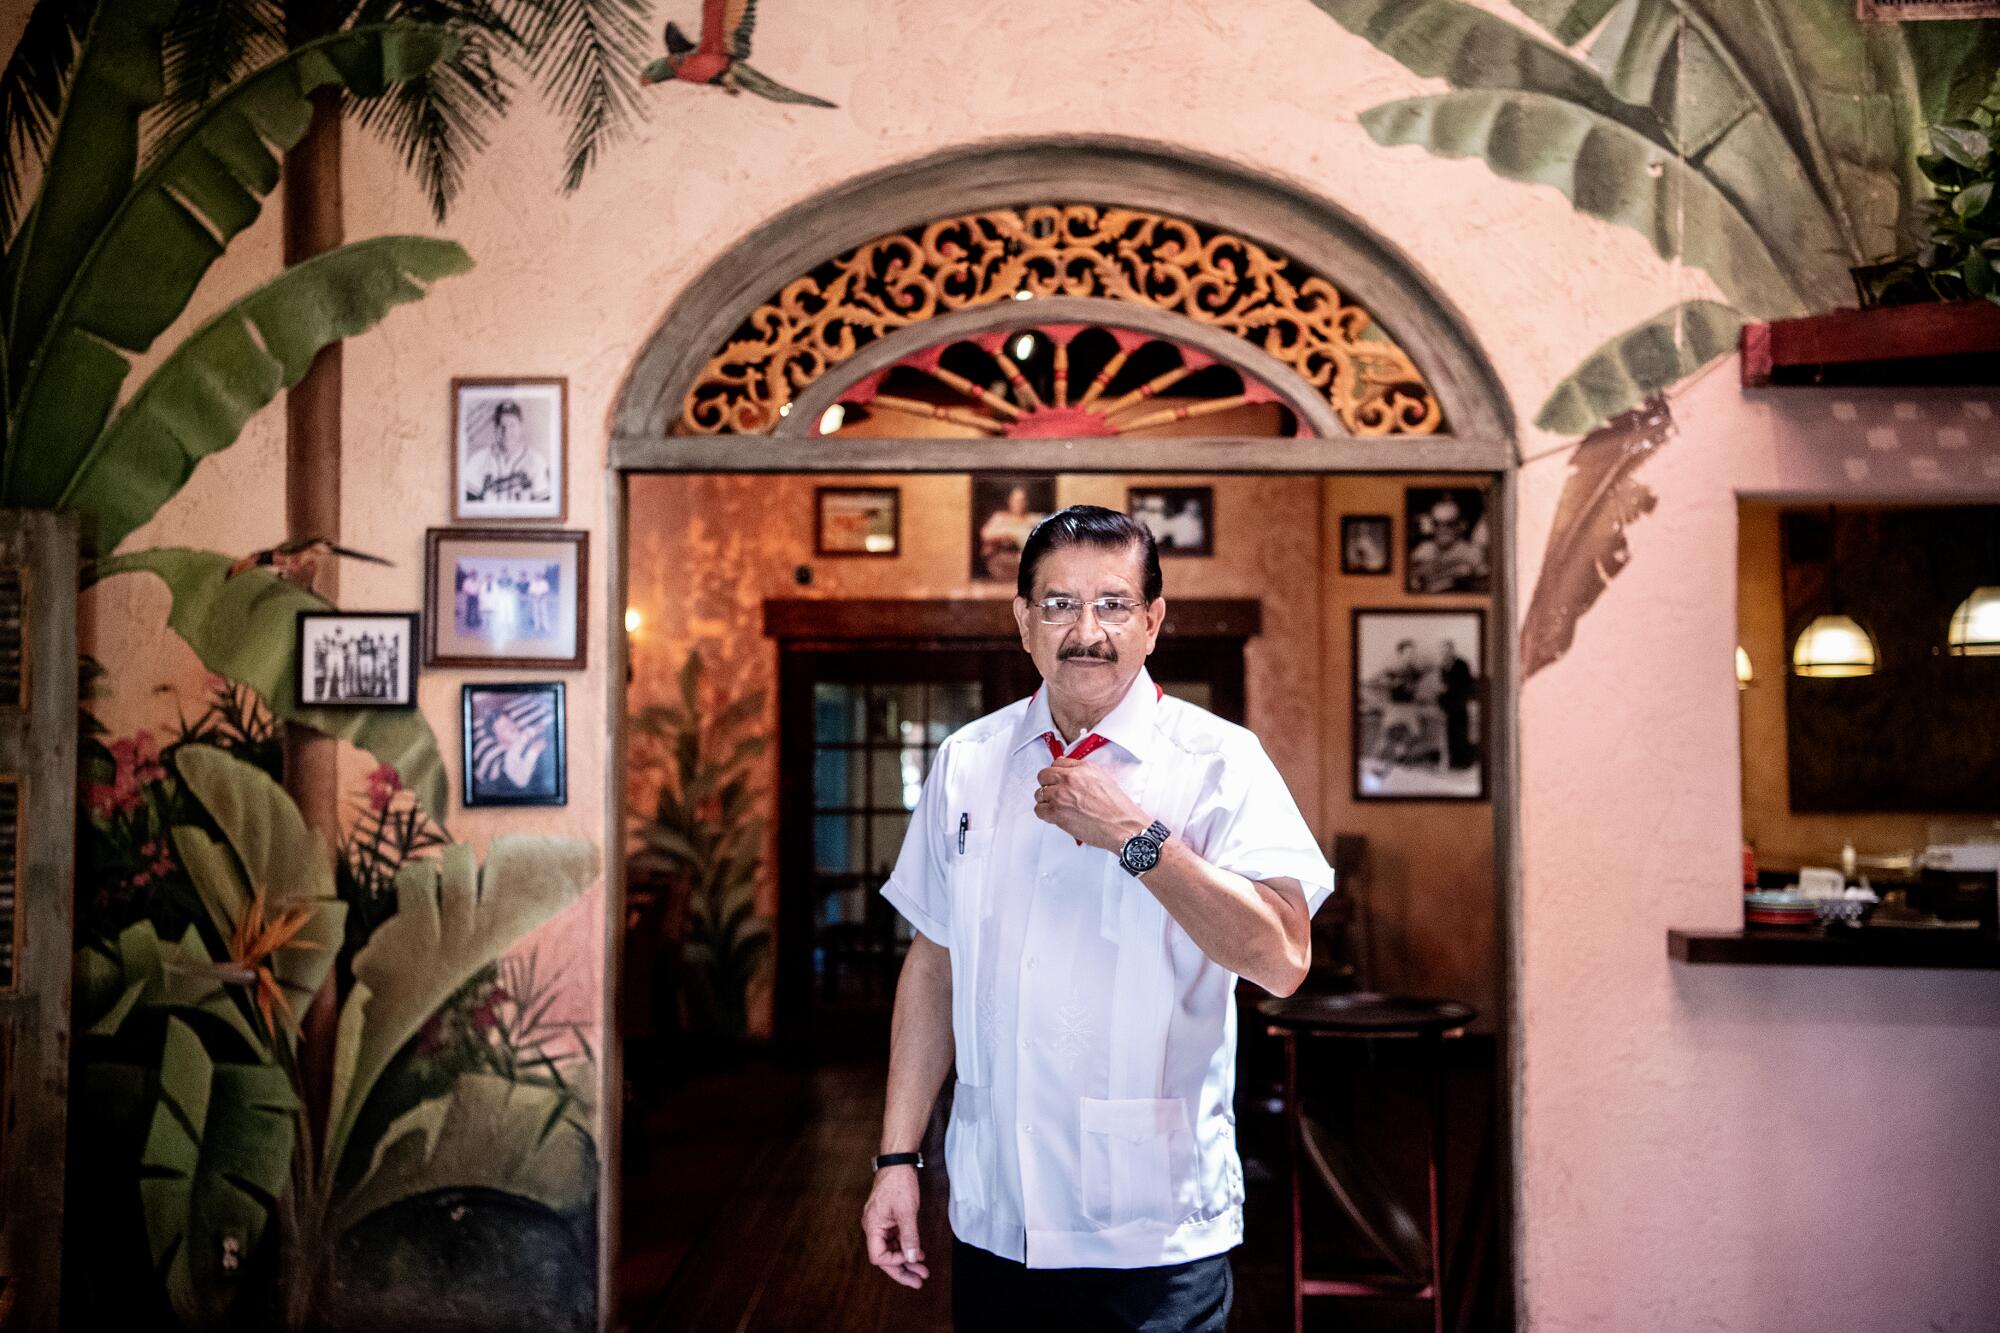 Justino Romero standing in the archway of two adjoining rooms at El Cholo.